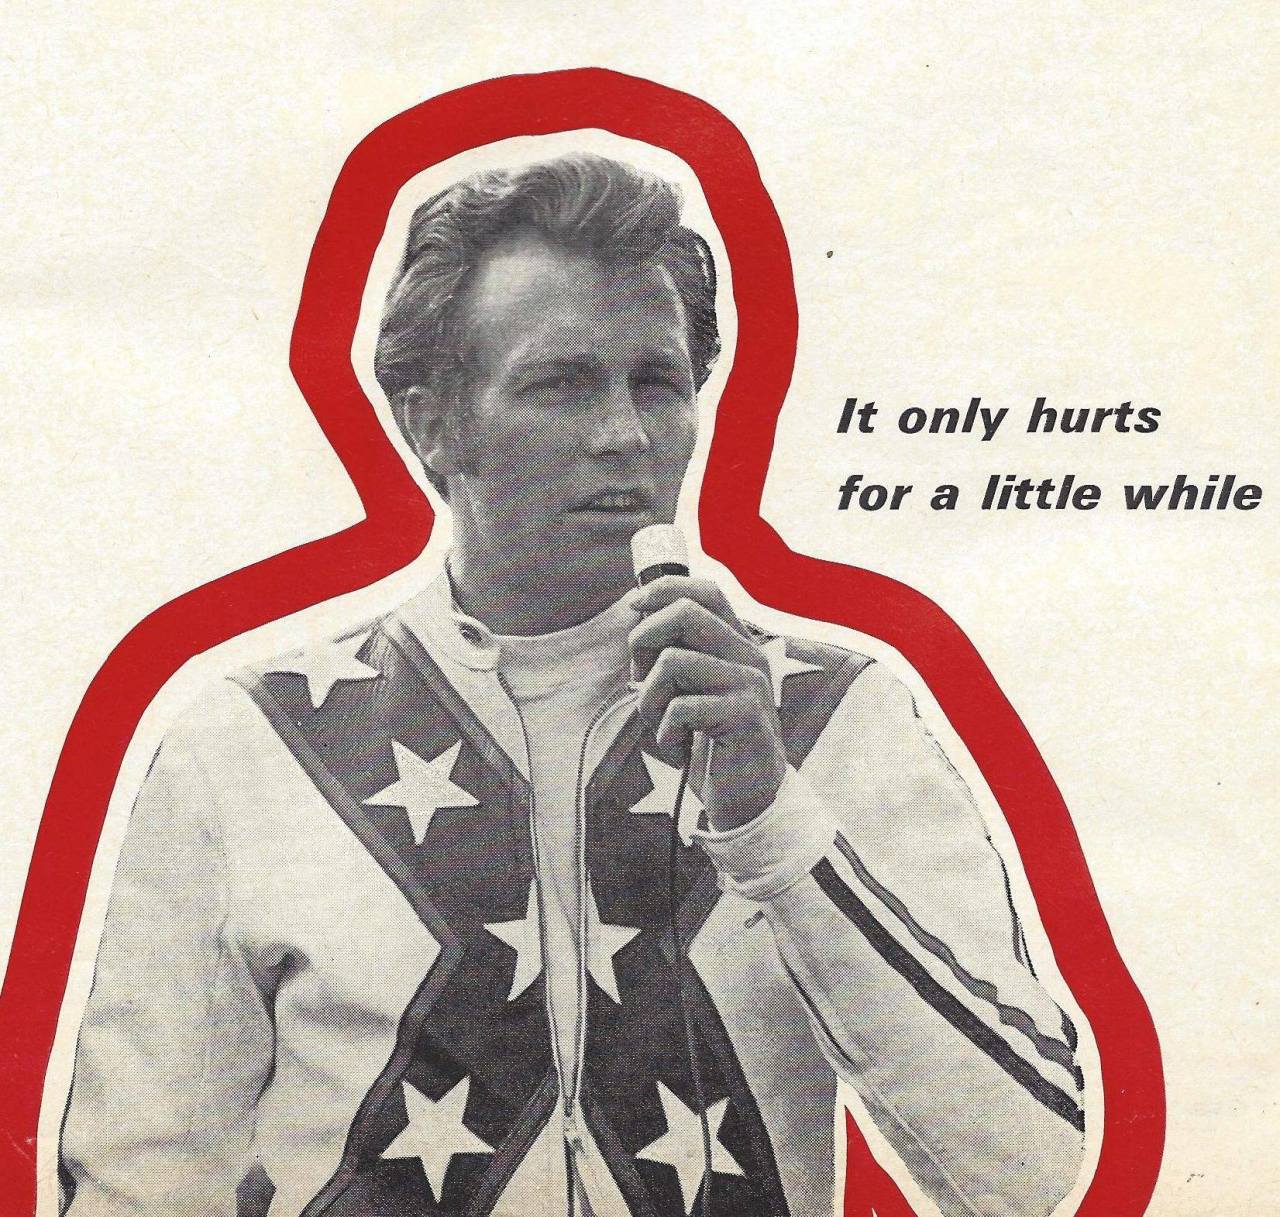 houseofevel:
“ Bones heal, chicks dig scars, pain is temporary, glory is forever.
-Evel Knievel
”